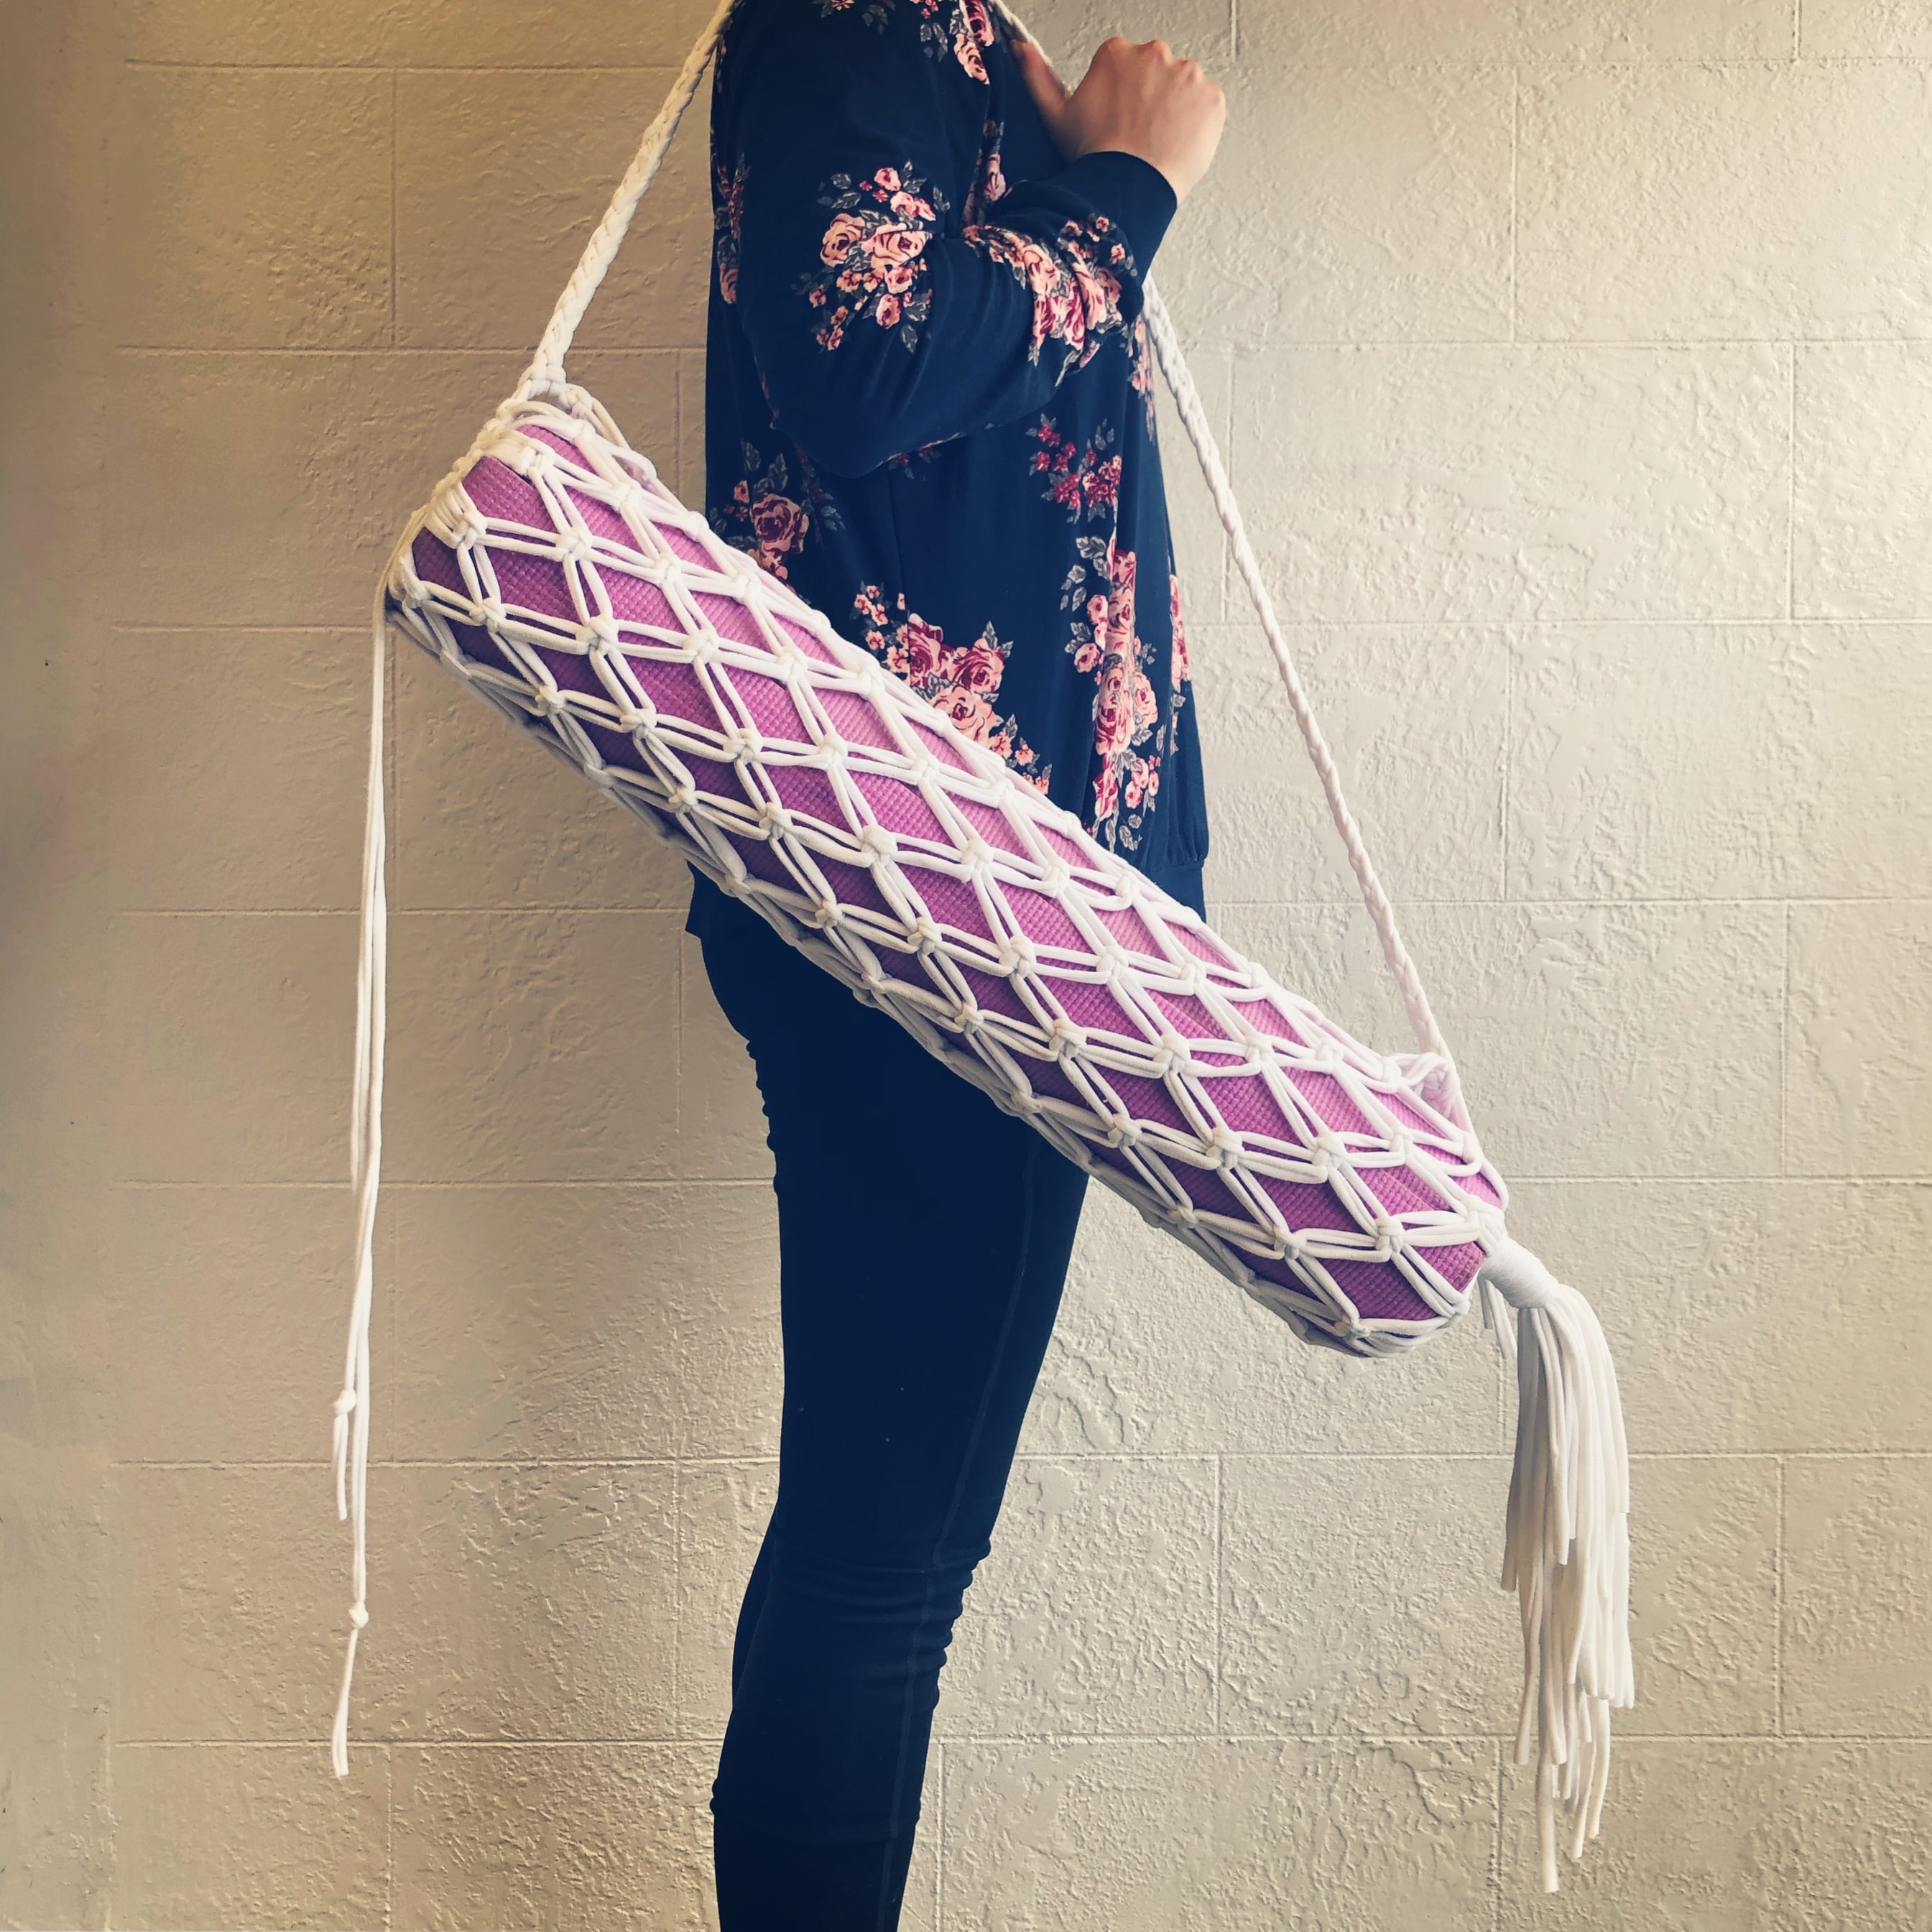 How To Make A Macrame Yoga Bag  International Society of Precision  Agriculture